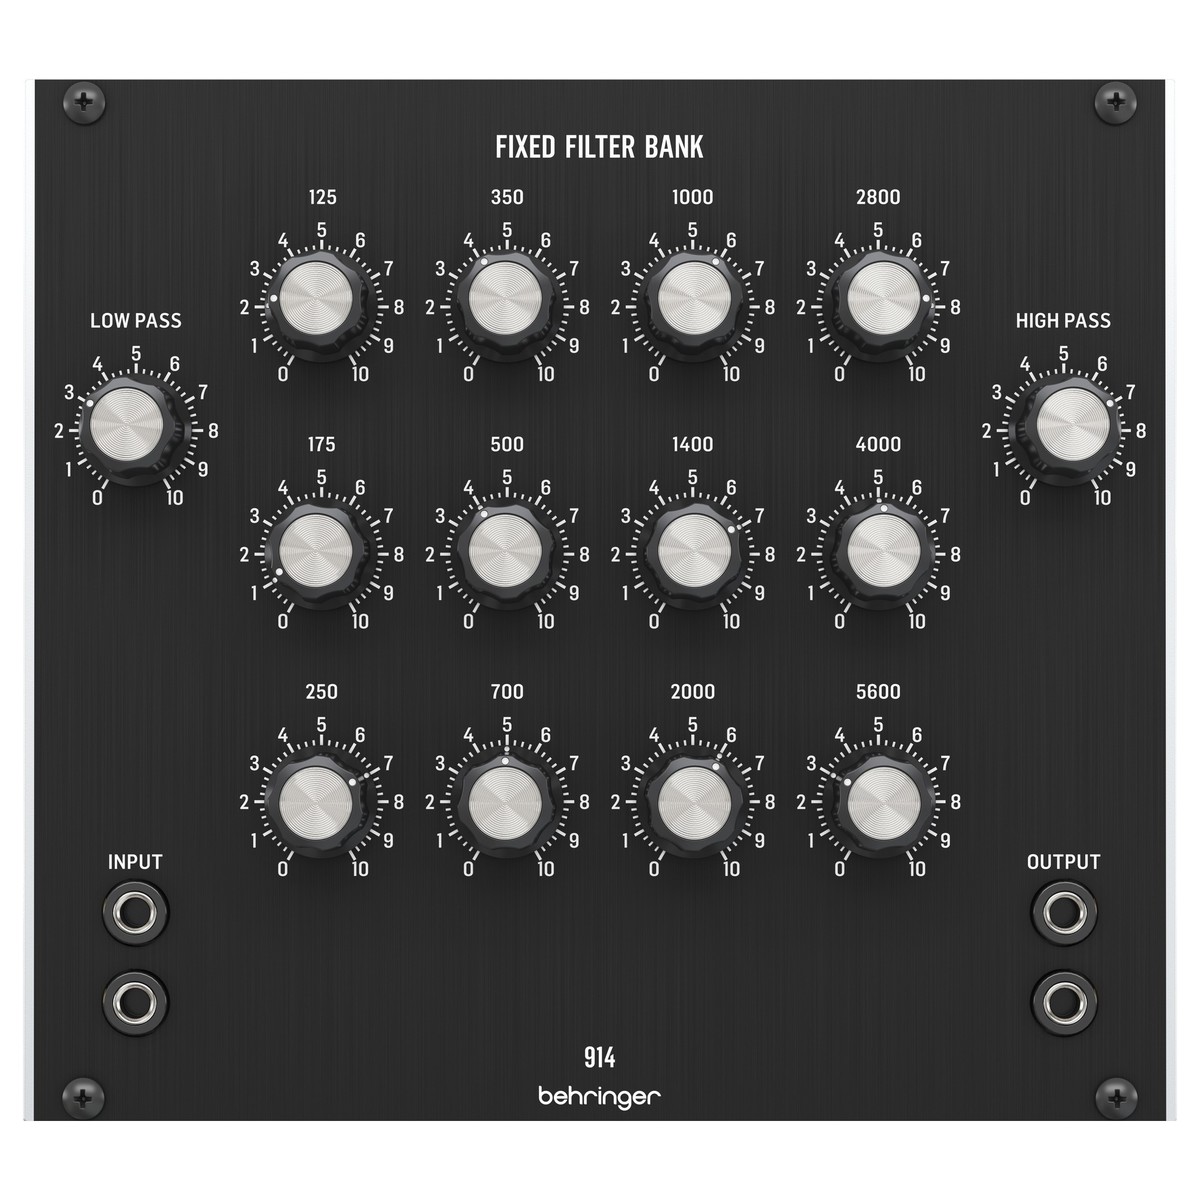 BEHRINGER 914 FIXED FILTER BANK MODULO ANALOGICO FIXED FILTER BANK PER EURORACK